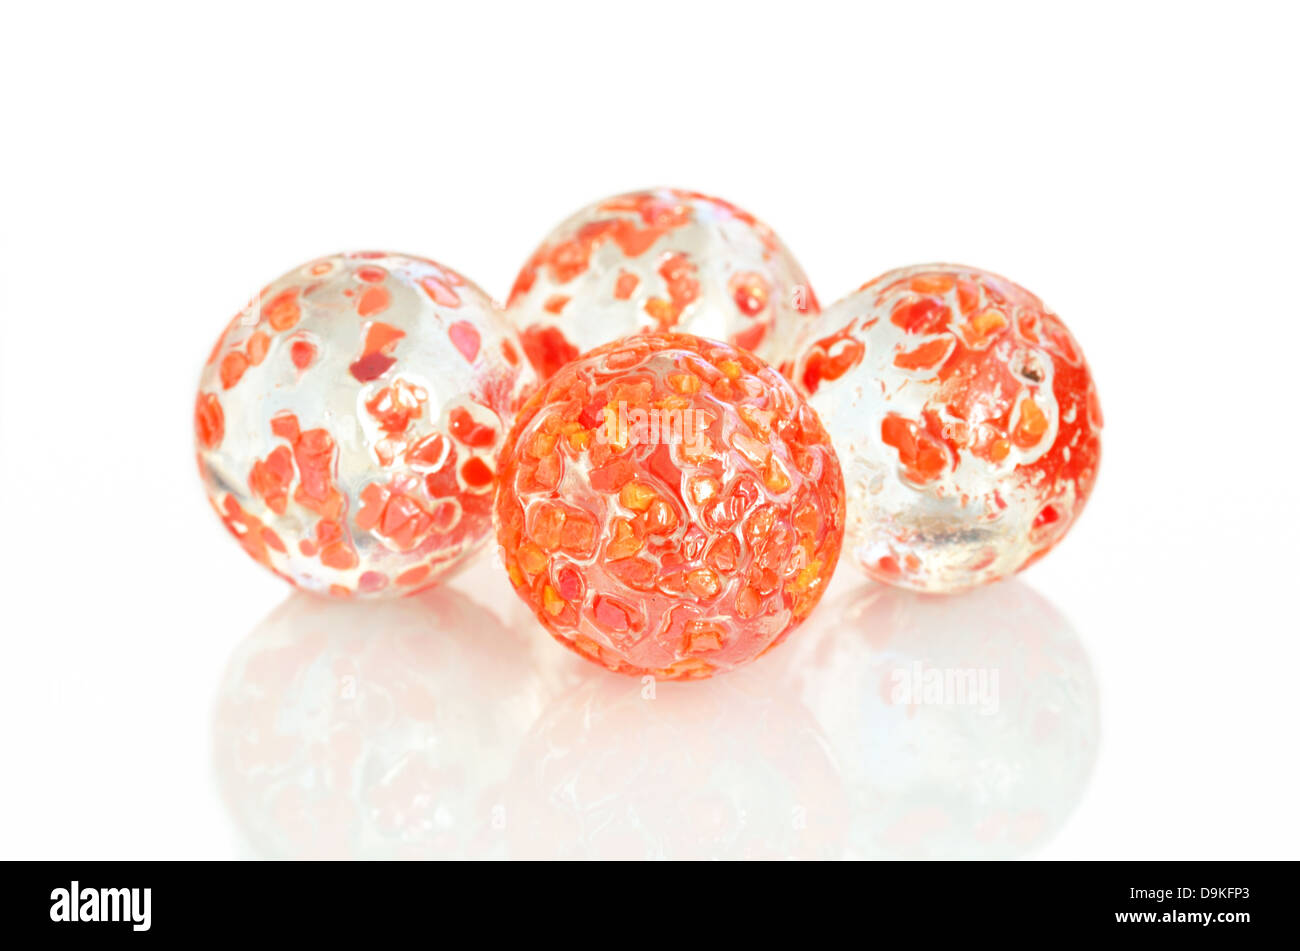 Red marbles stock photo. Image of crystal, shade, balls - 11859526